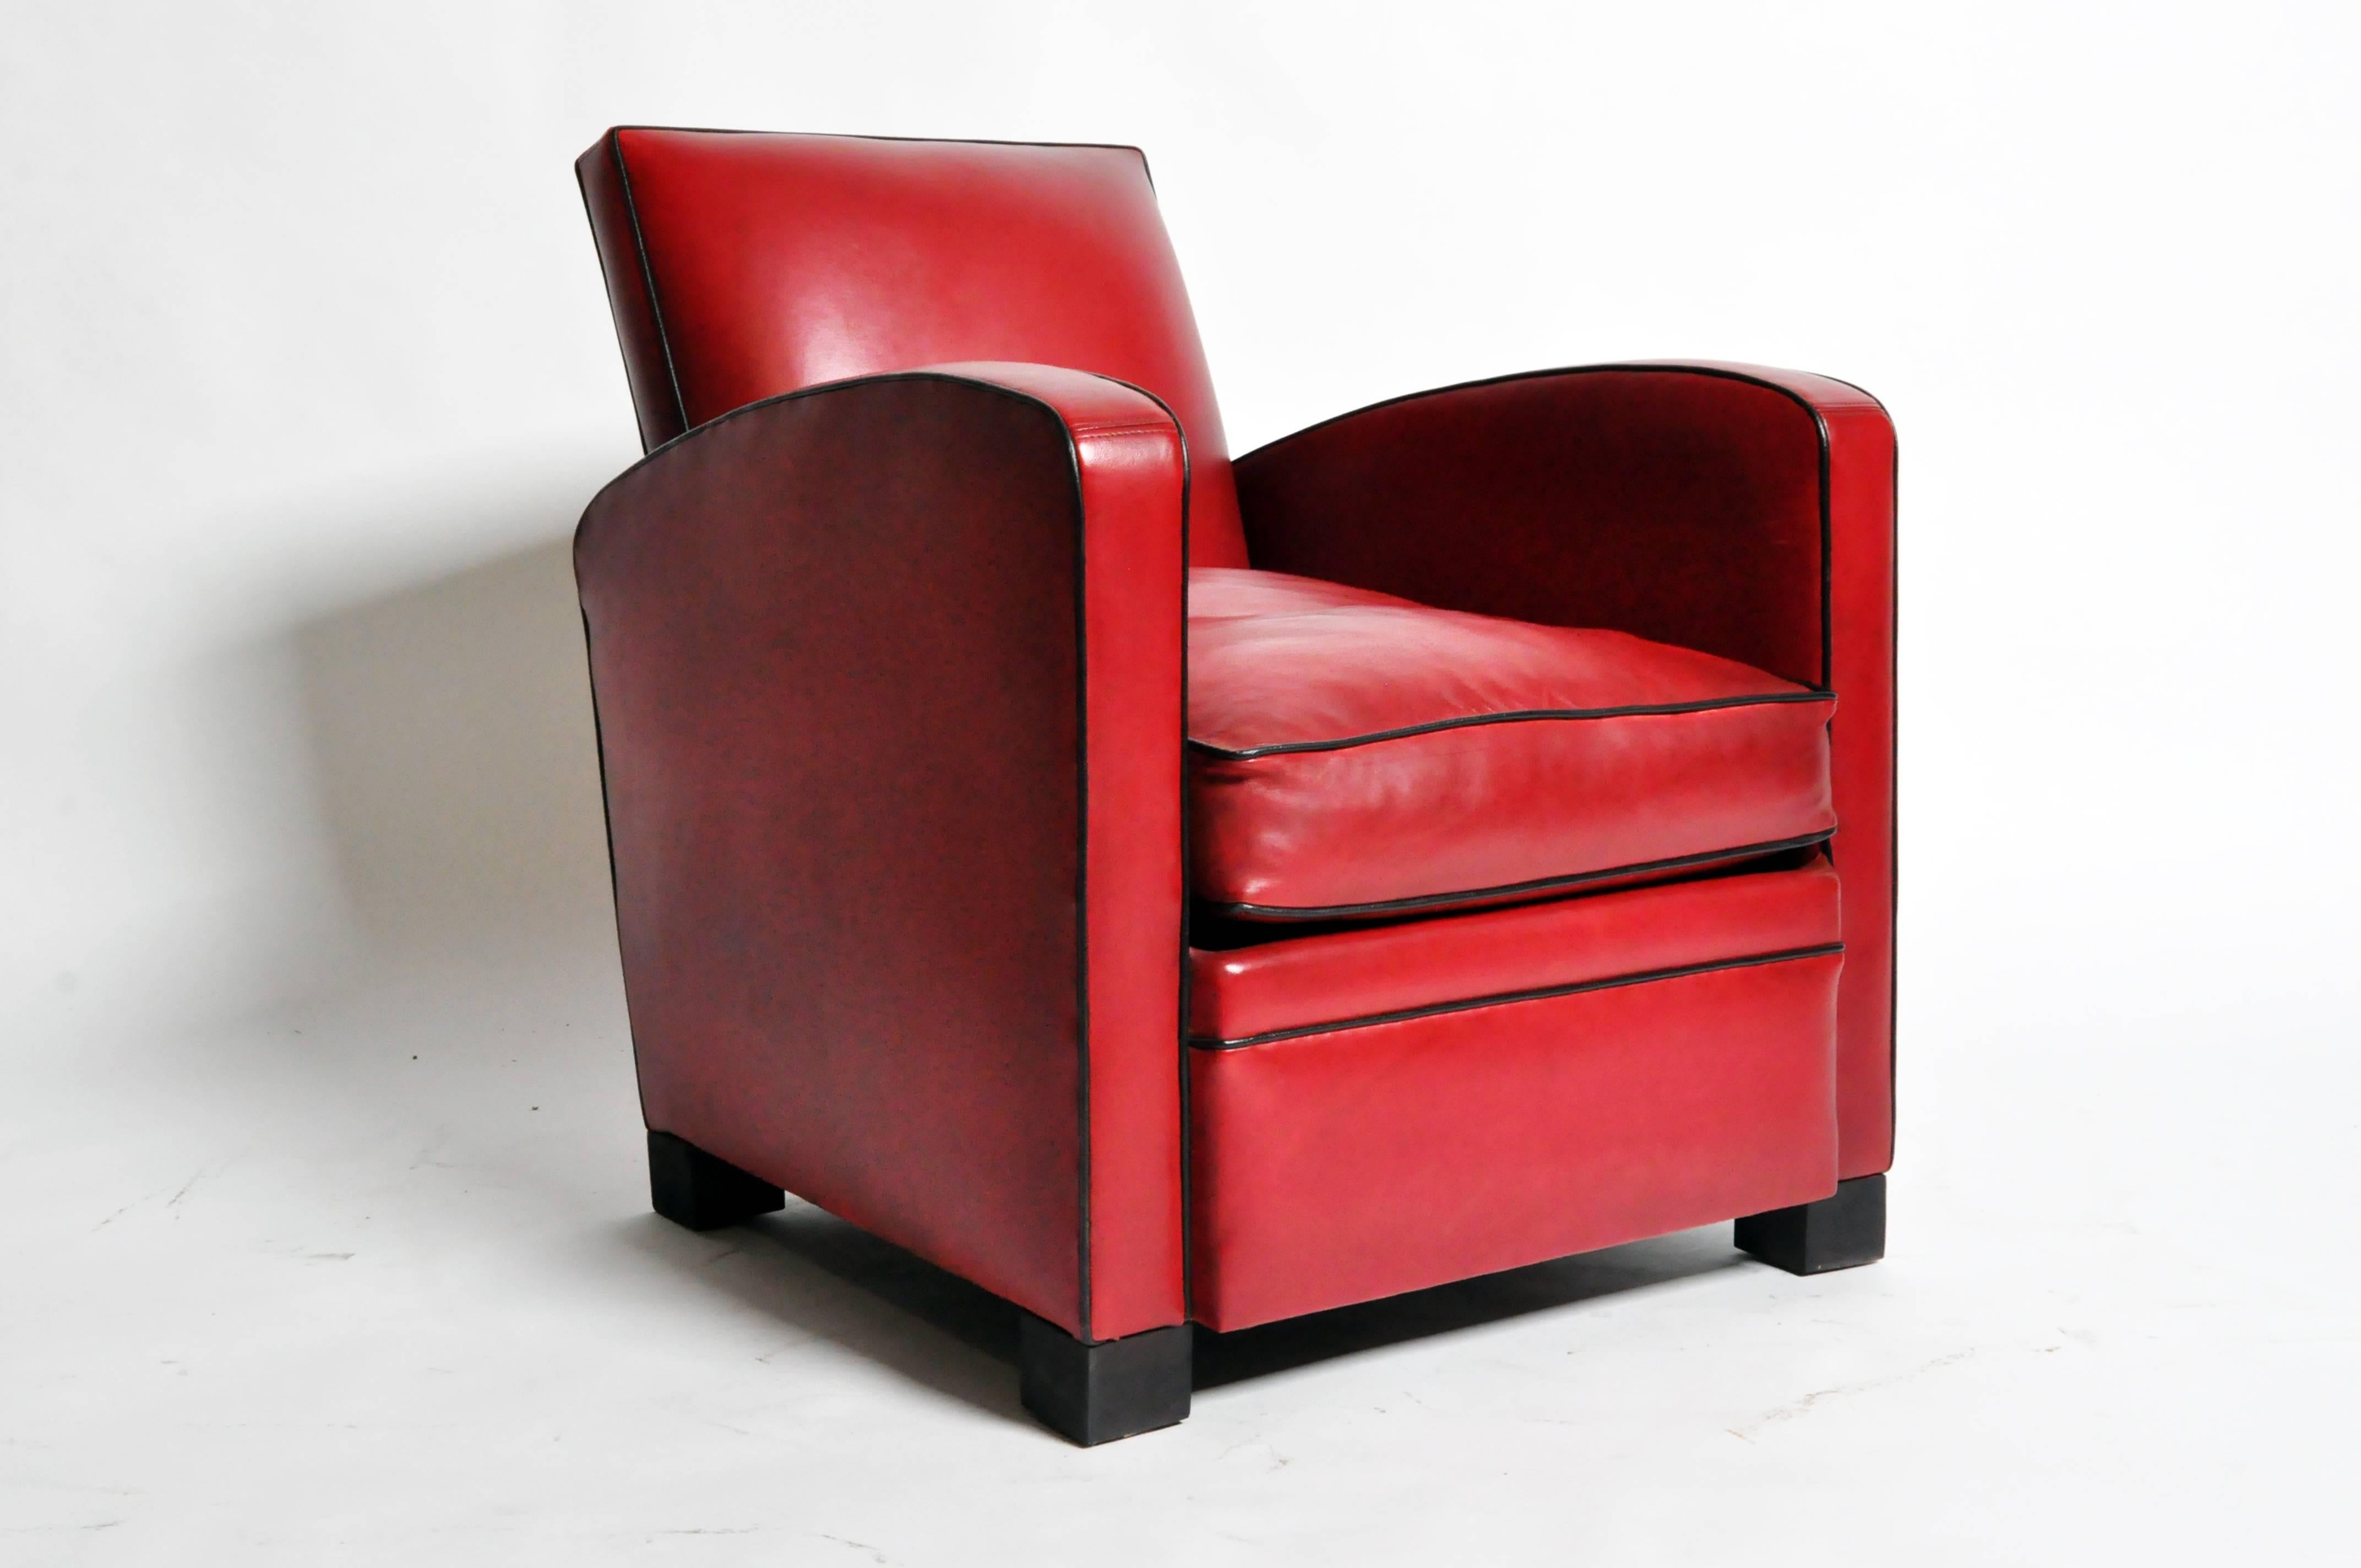 French Pair of Parisian Red Leather Club Chairs with Black Piping